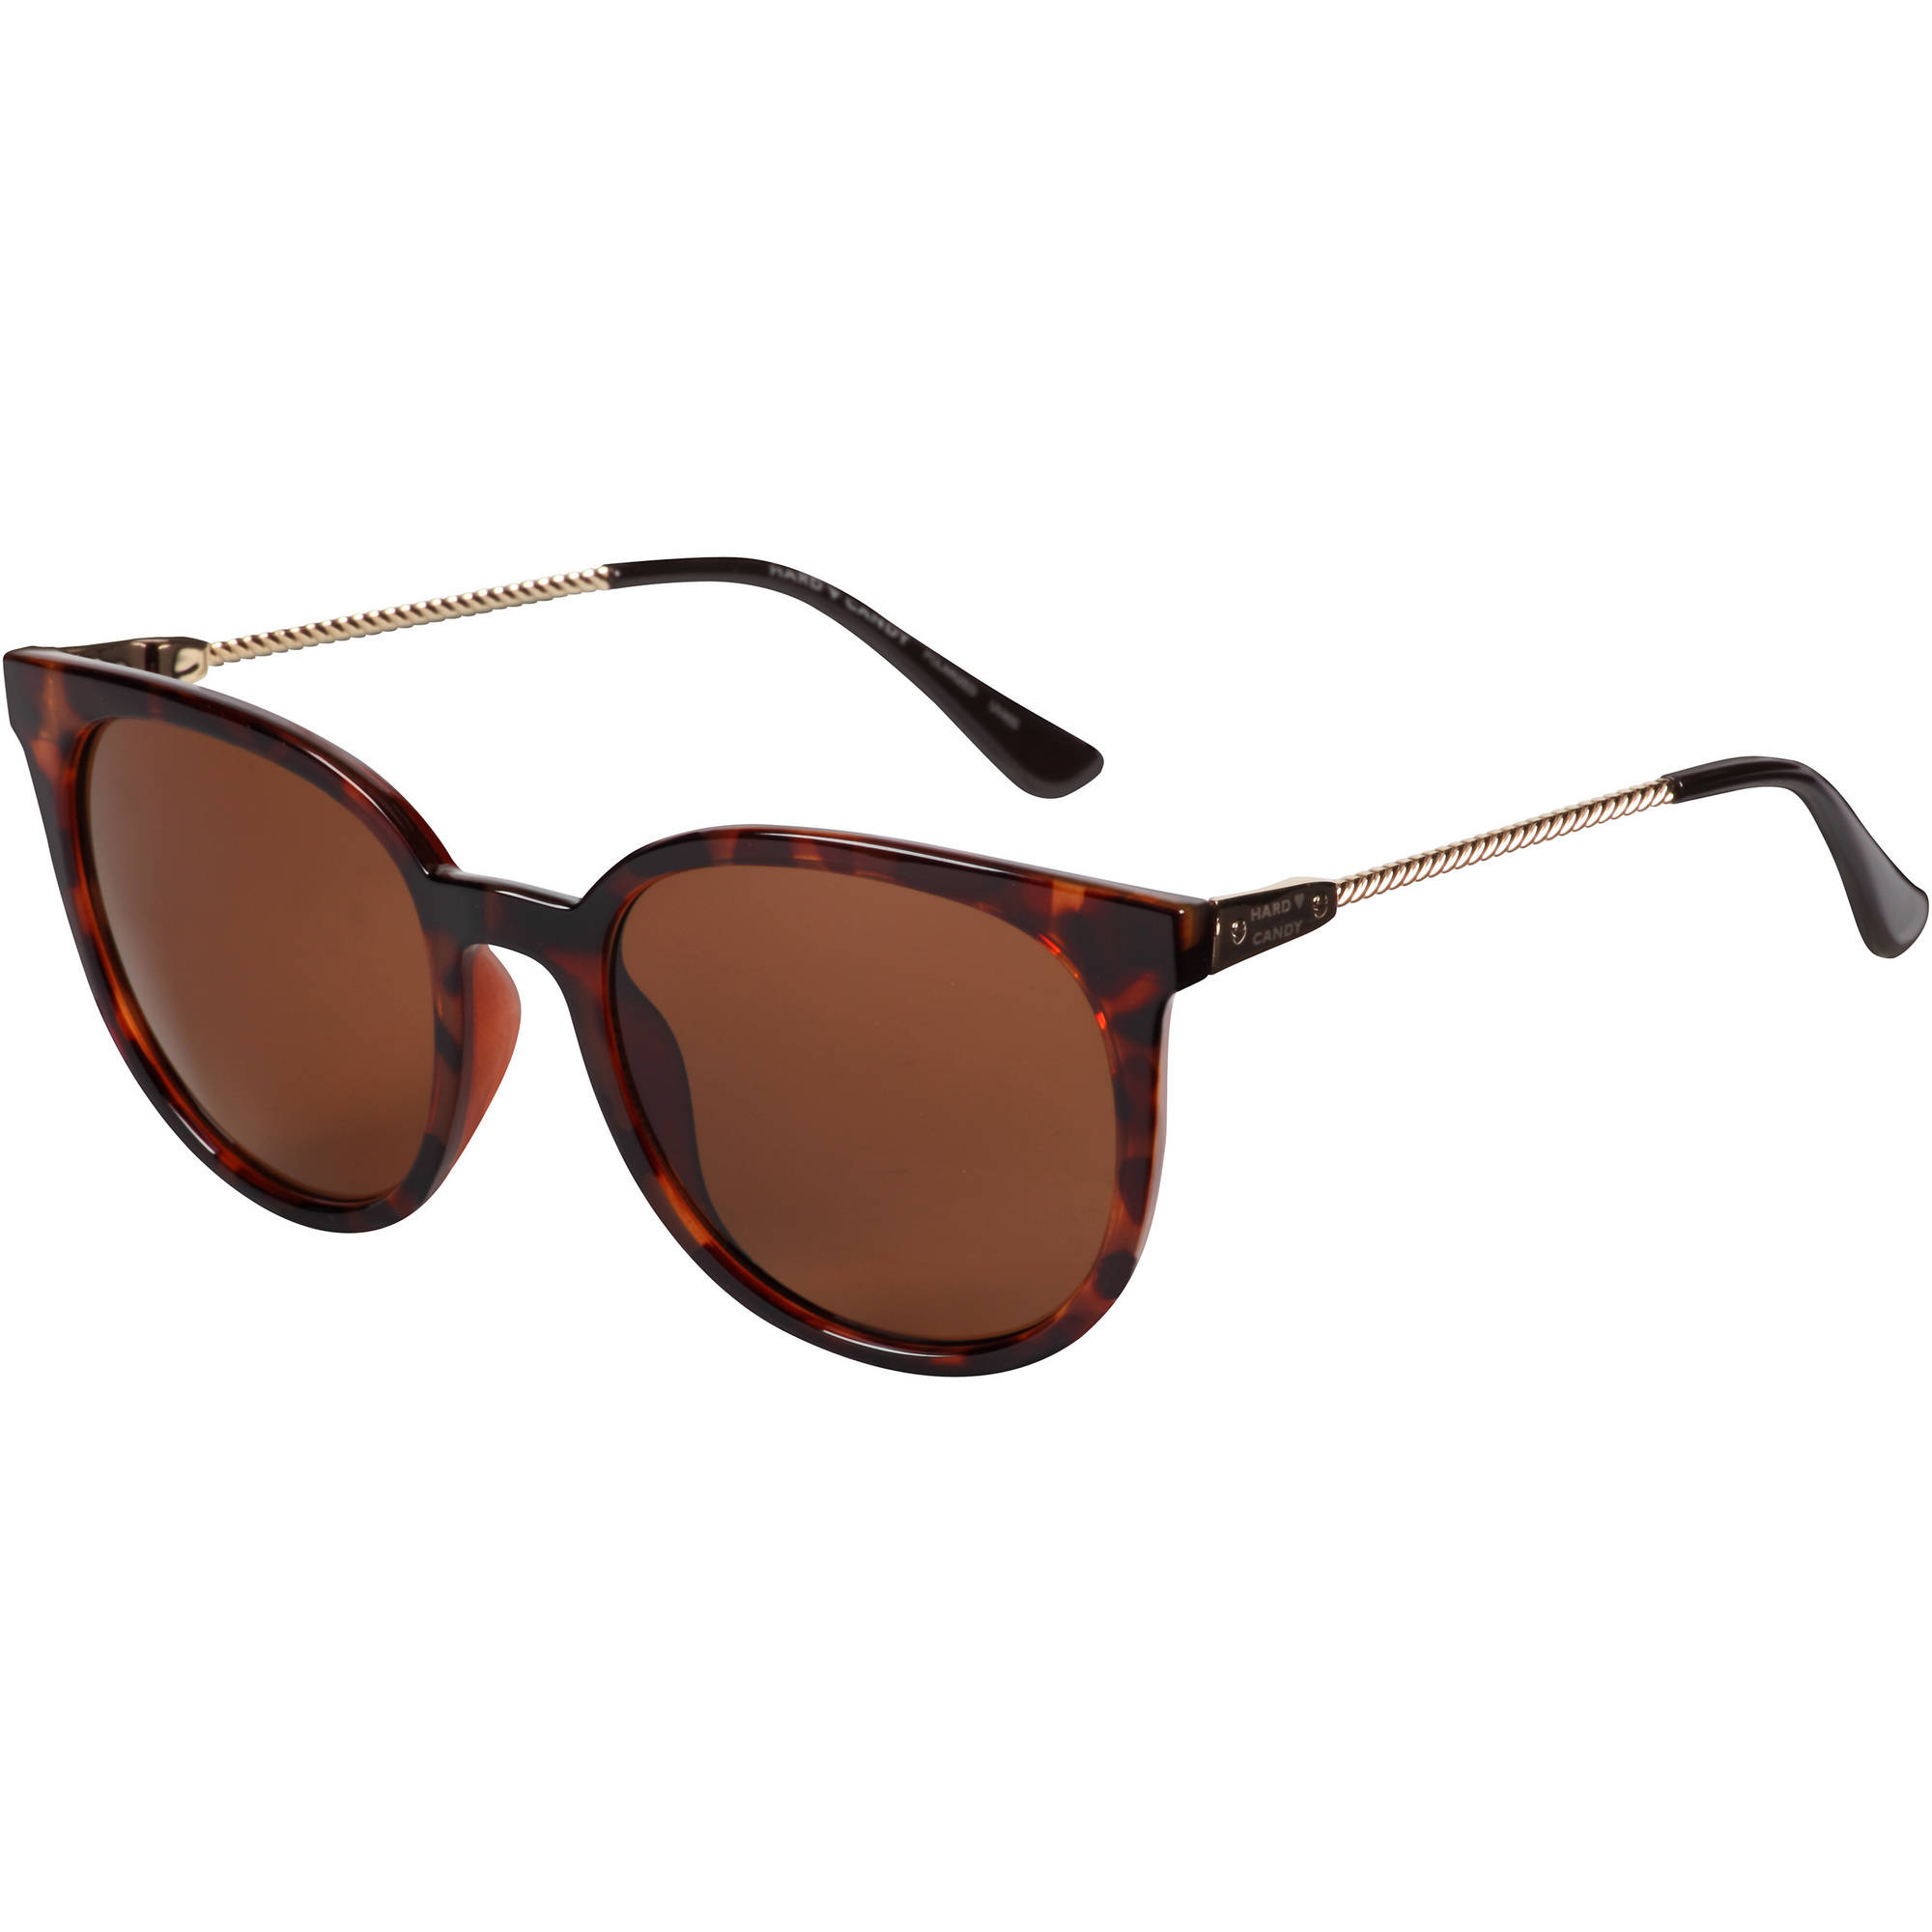 Hard Candy Womens Rx'able Sunglasses, Hs15, Dark Tortoise Patterned, 54-20-143, with Case - image 1 of 13